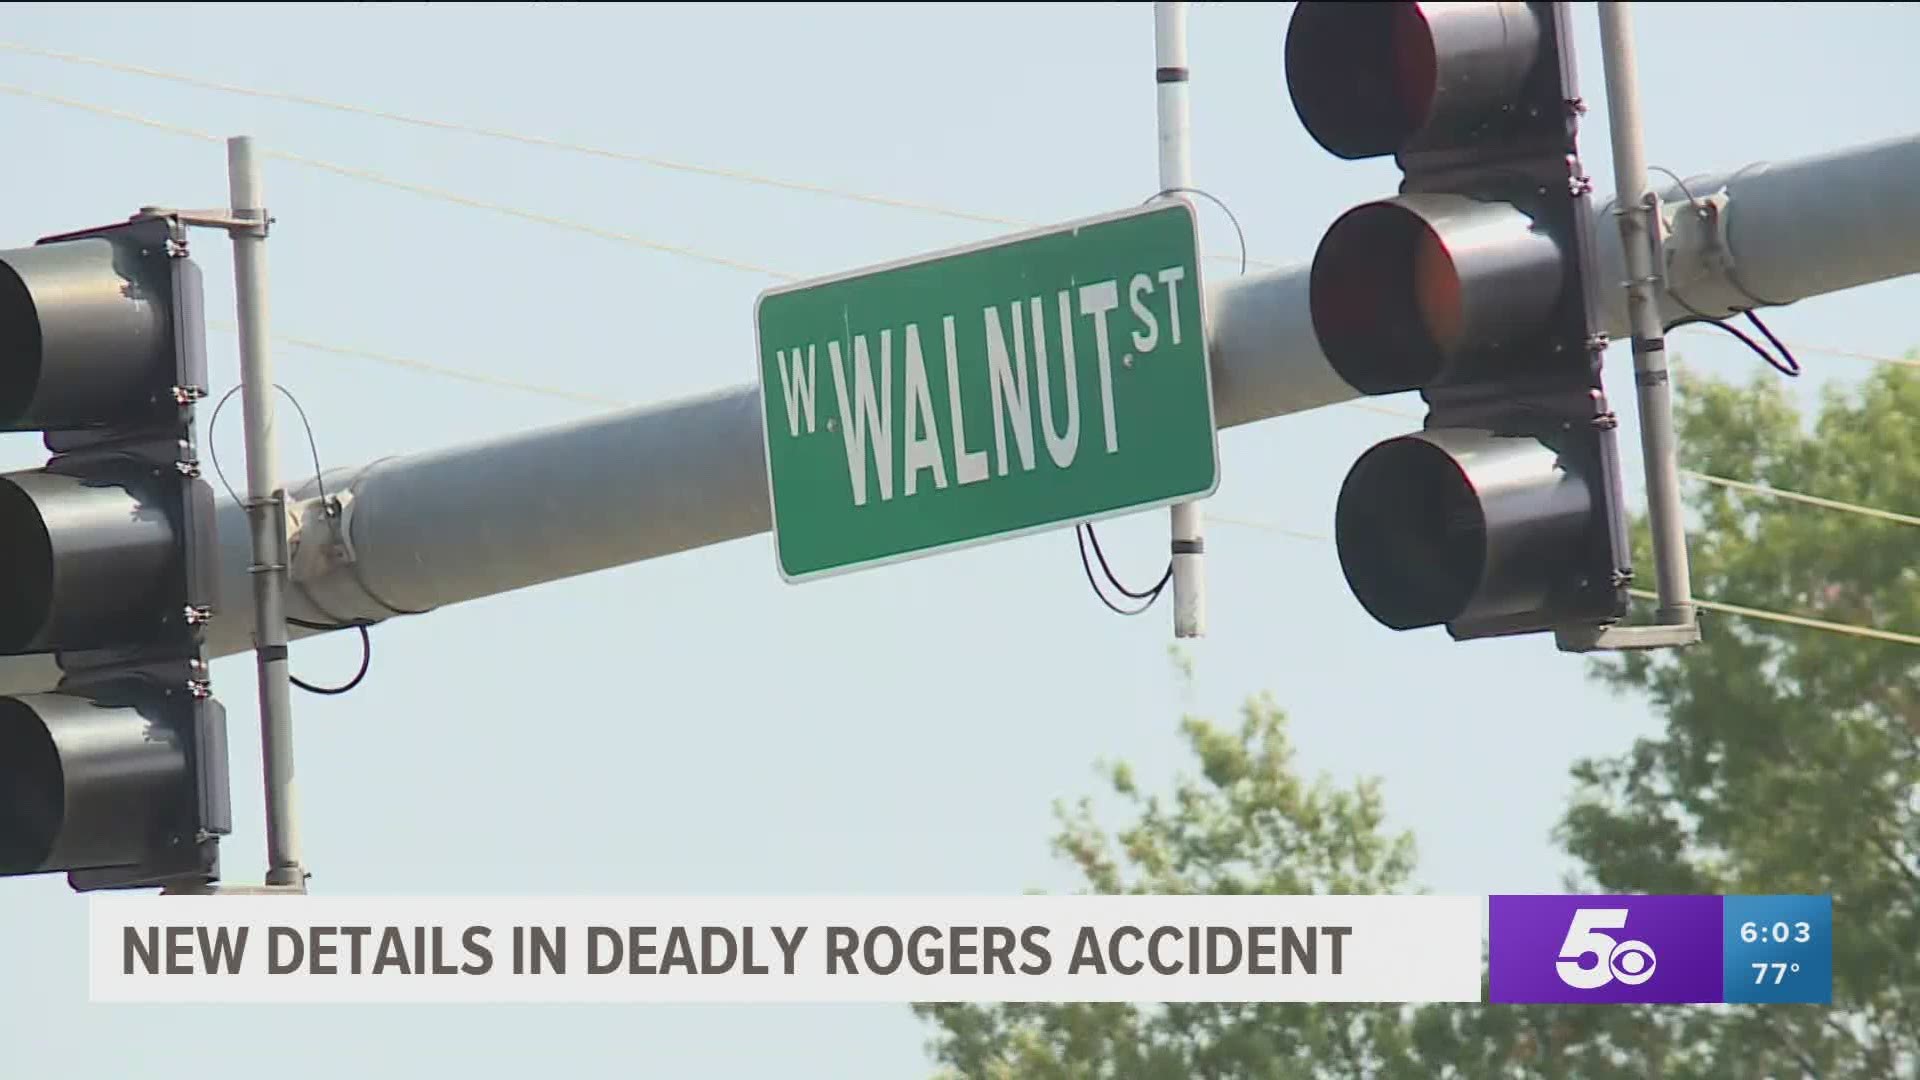 The victim in the crash has been identified as 58-year-old Susan Stacy of Rogers. https://bit.ly/3iEtPCB